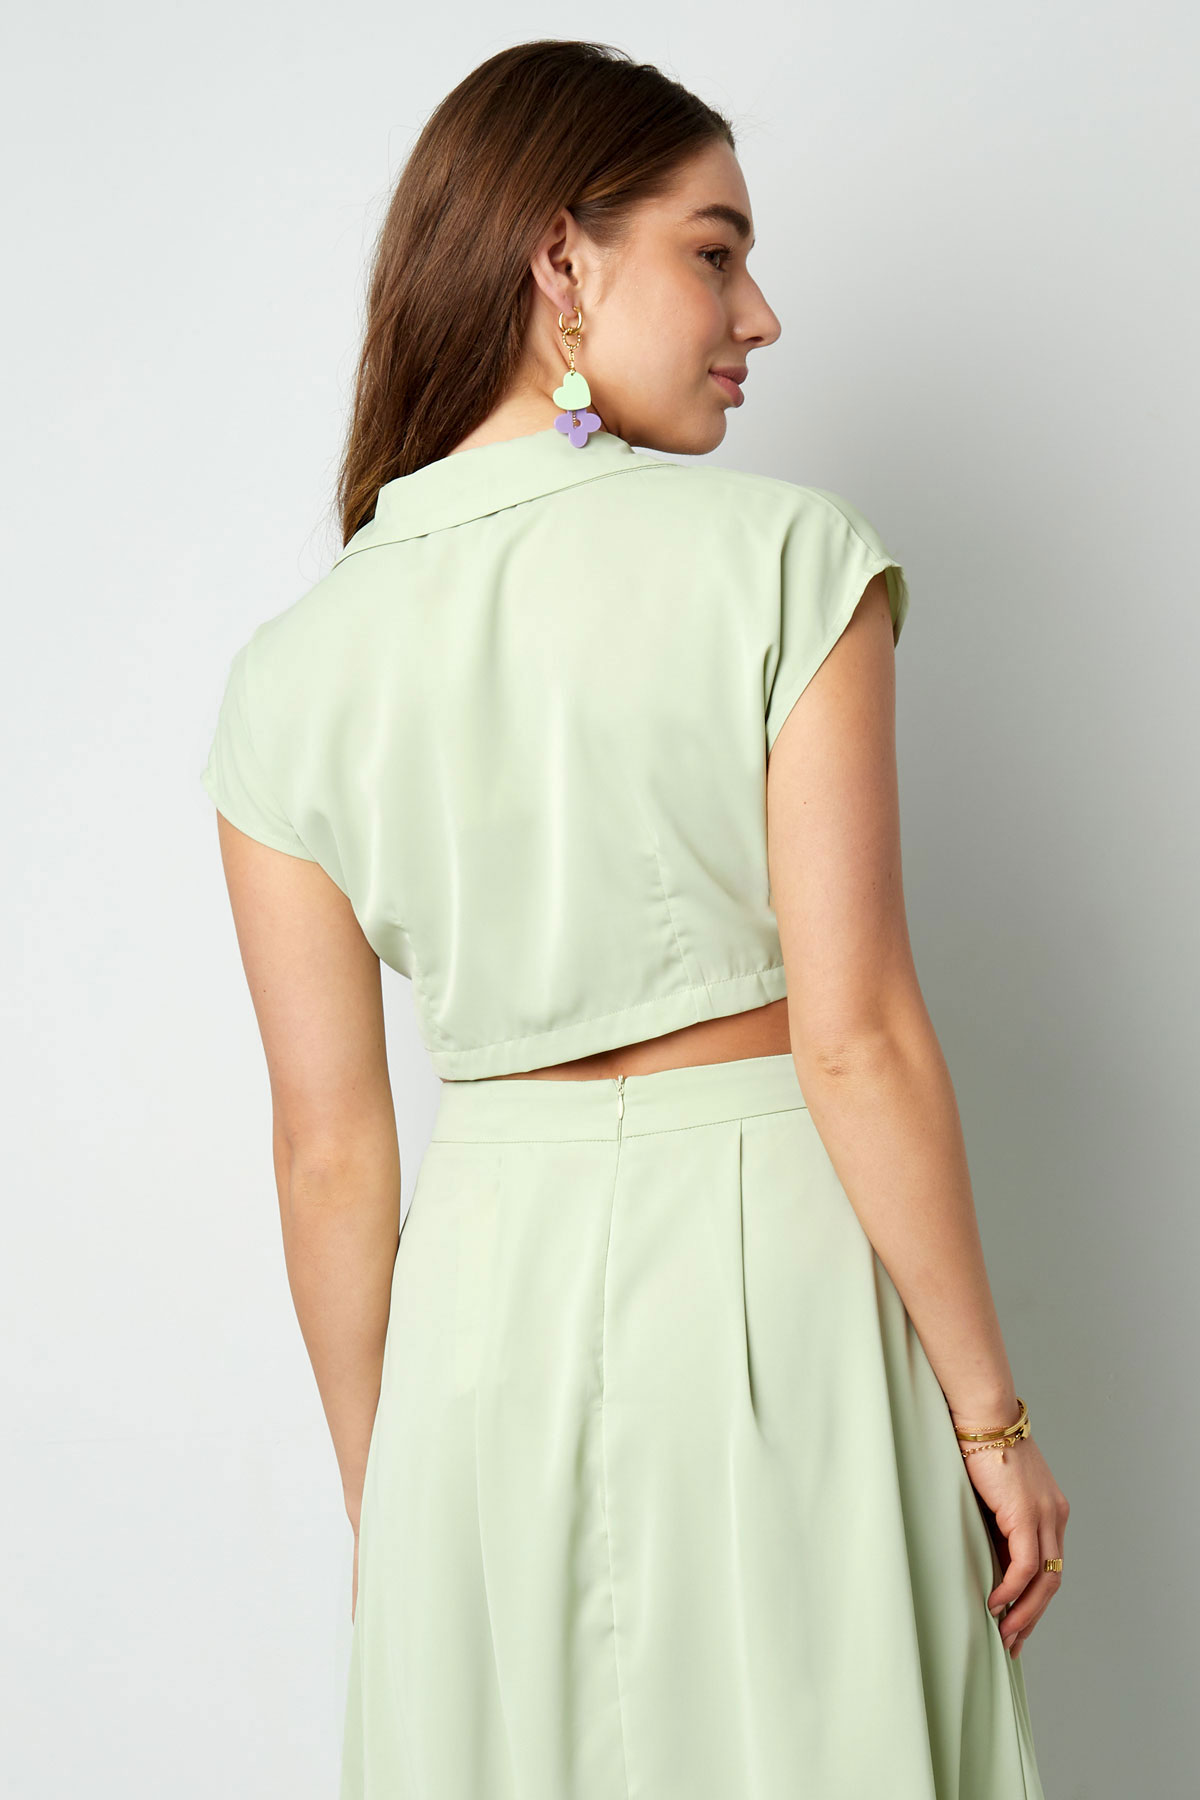 Cropped top with button - green Picture8